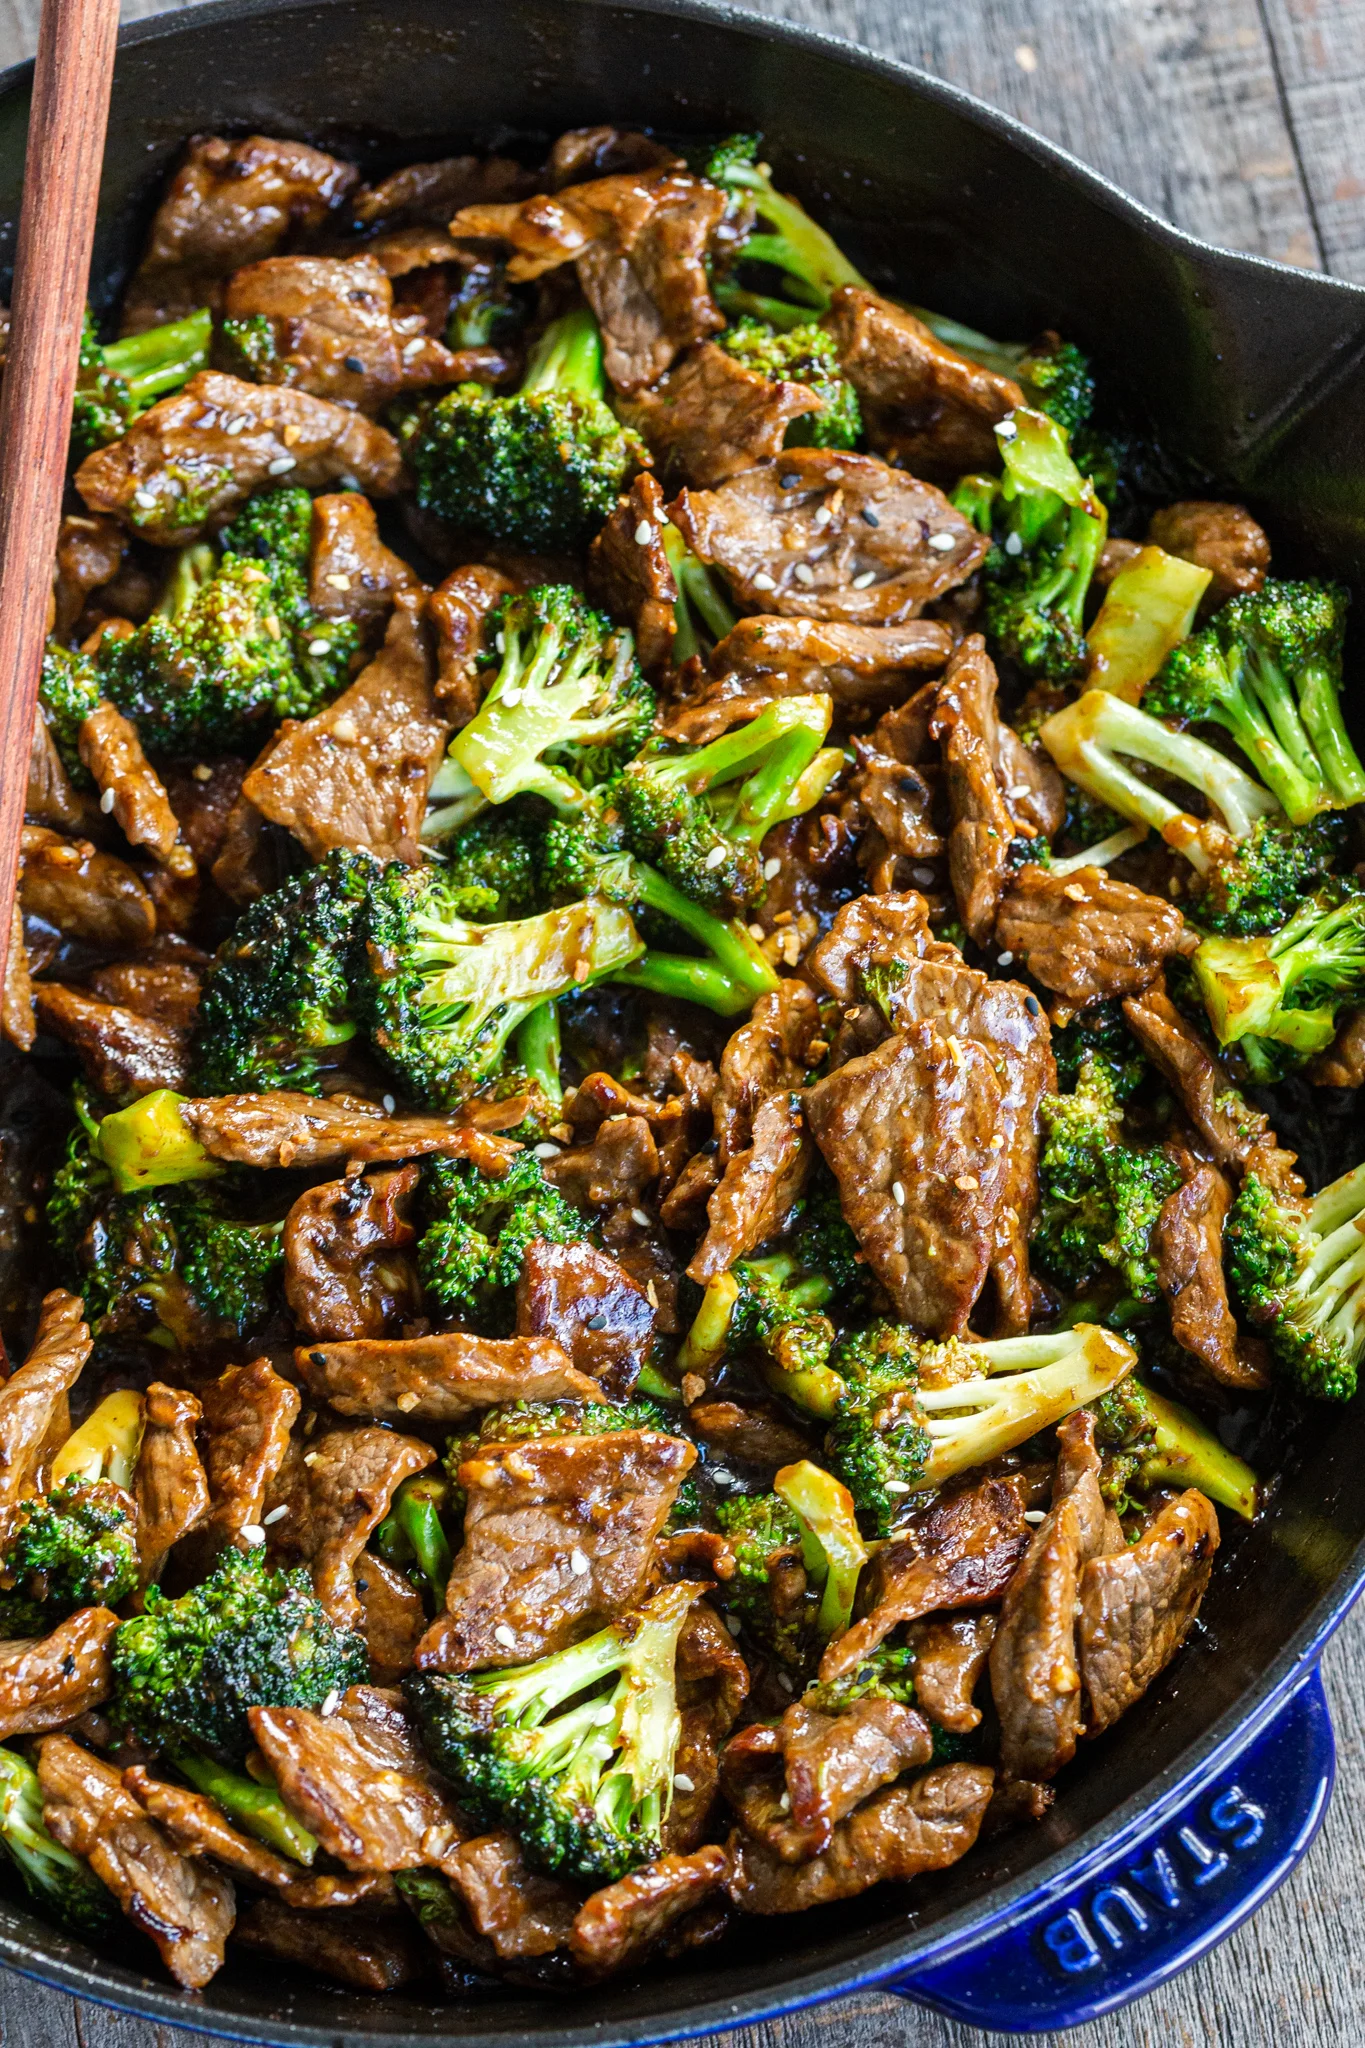 Easiest One-Pot Beef With broccoli